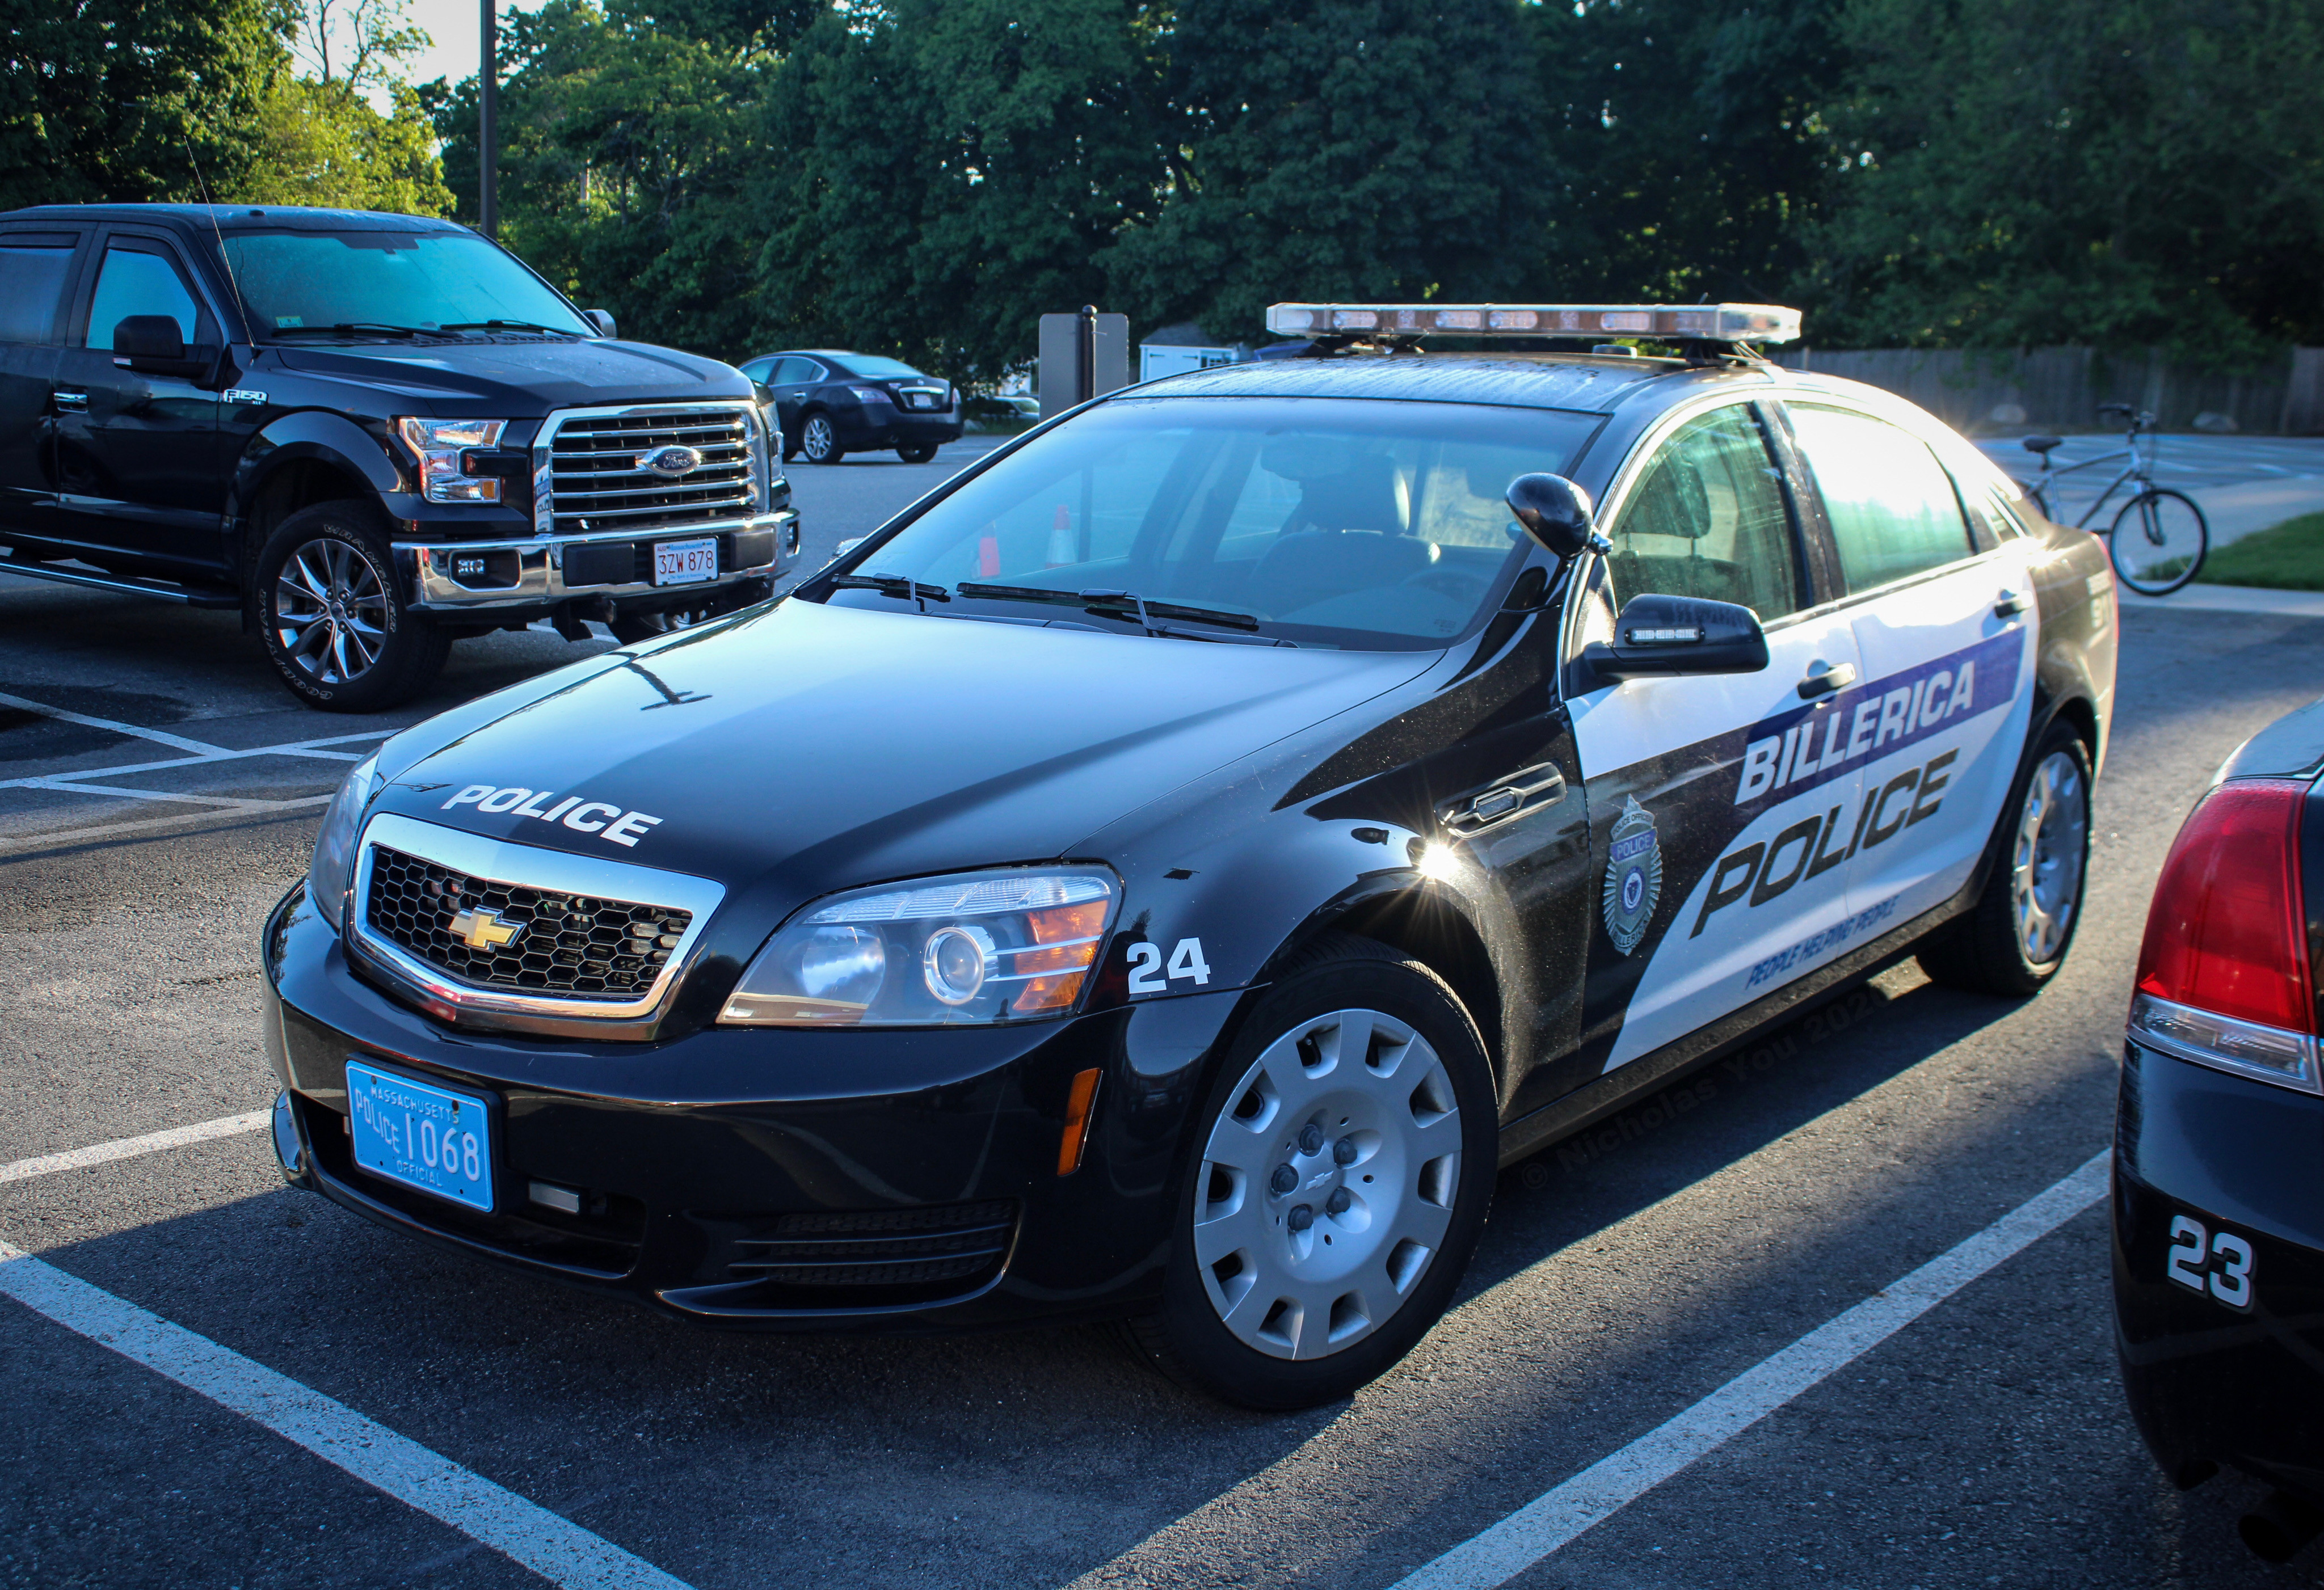 A photo  of Billerica Police
            Car 24, a 2012 Chevrolet Caprice             taken by Nicholas You